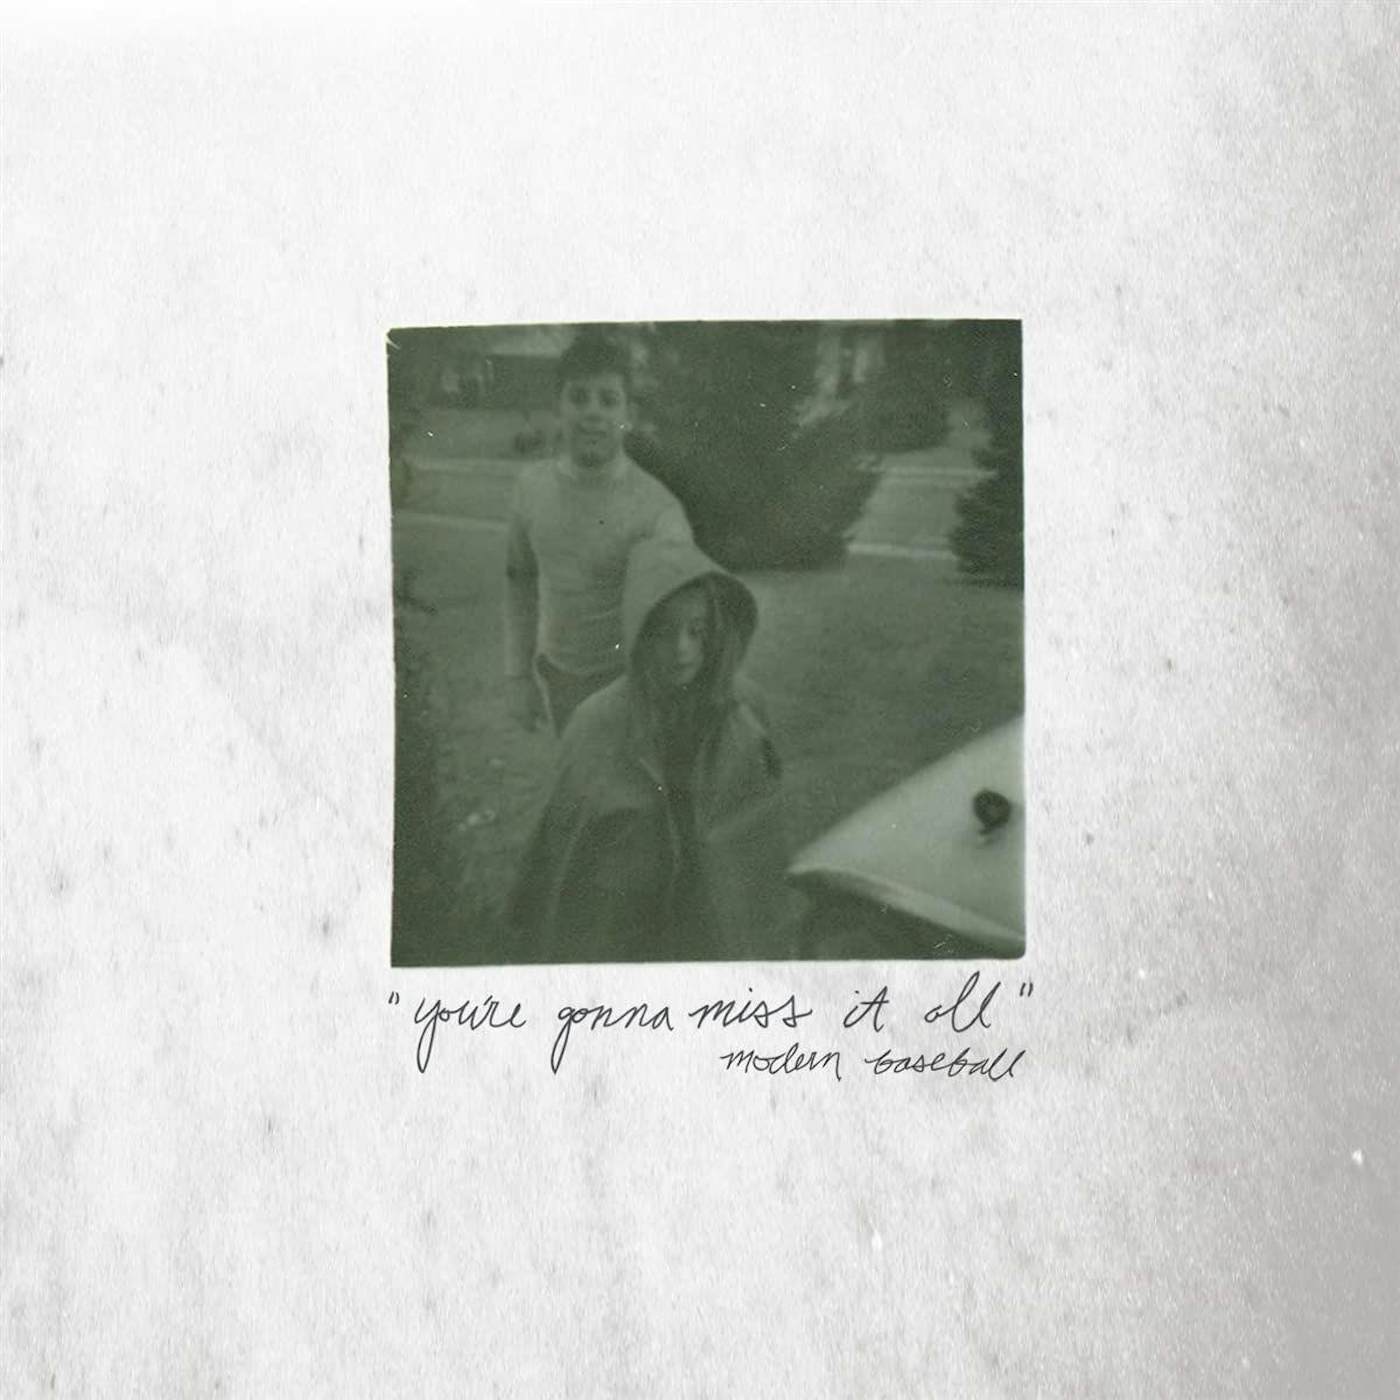 Modern Baseball You're Gonna Miss It All (Olive Green) Vinyl Record